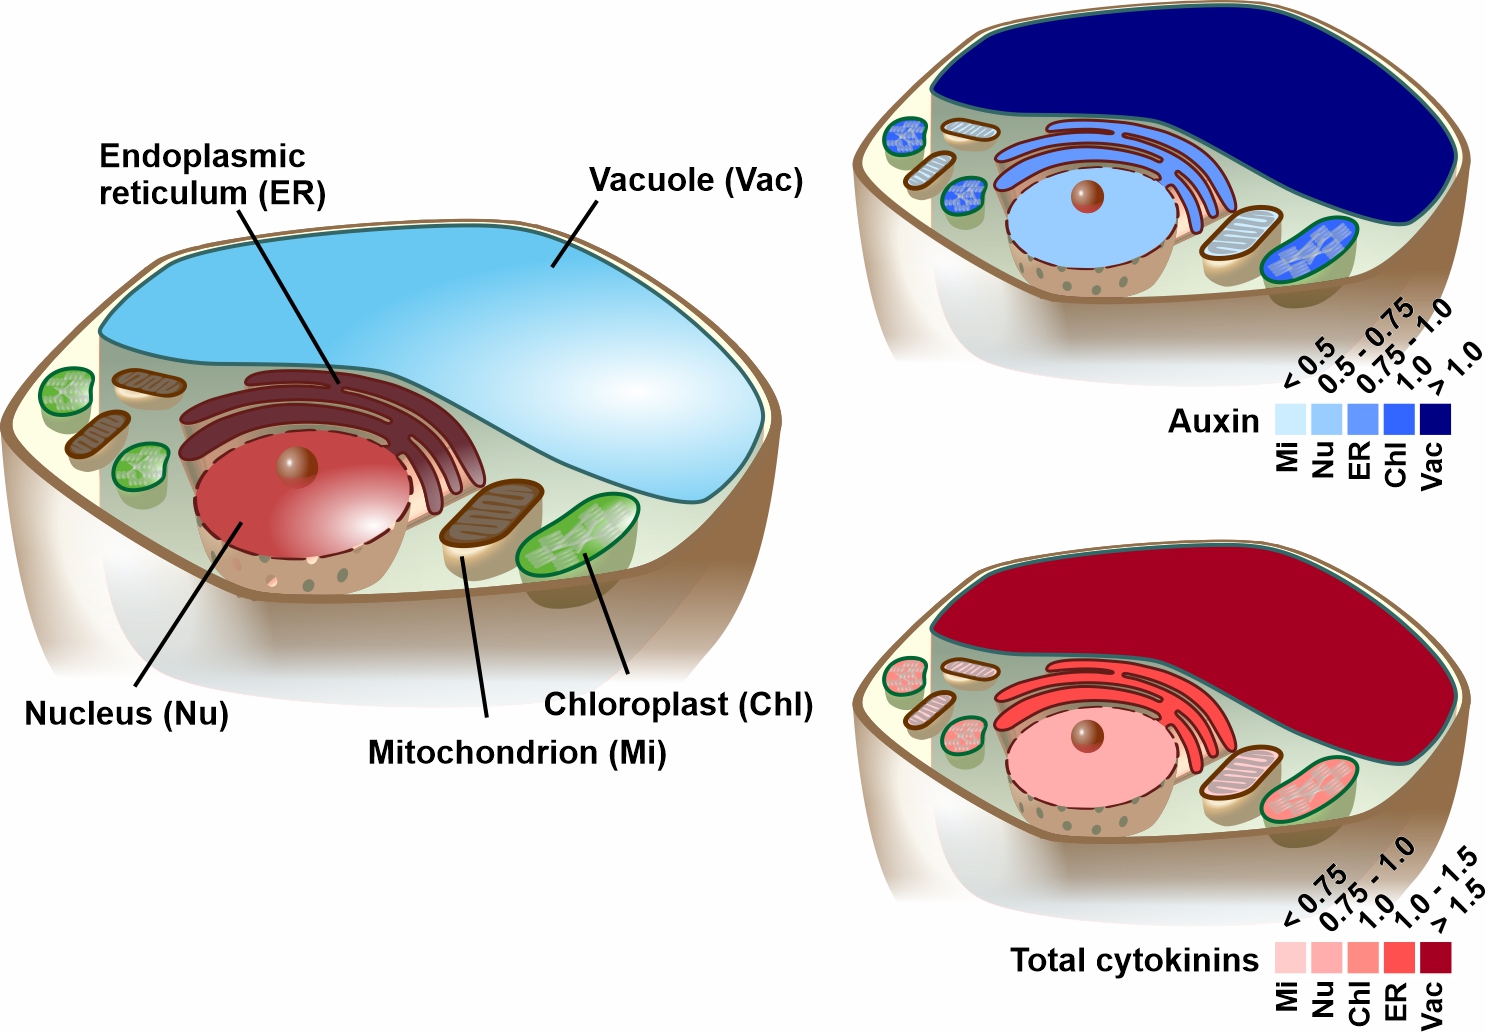 On the left side, a graphical overviews of the compartments of a plant cell that are labeled in different colours are shown. On the upper right corner the concentration of the plant hormone auxin is shown in different blue coulors in the different cell compartments illustrating that the highest concentration. Similarly, the concentration of the plant hormoone cytokinin in the different cell compartments is shown on the lower right corner in different red colours.  